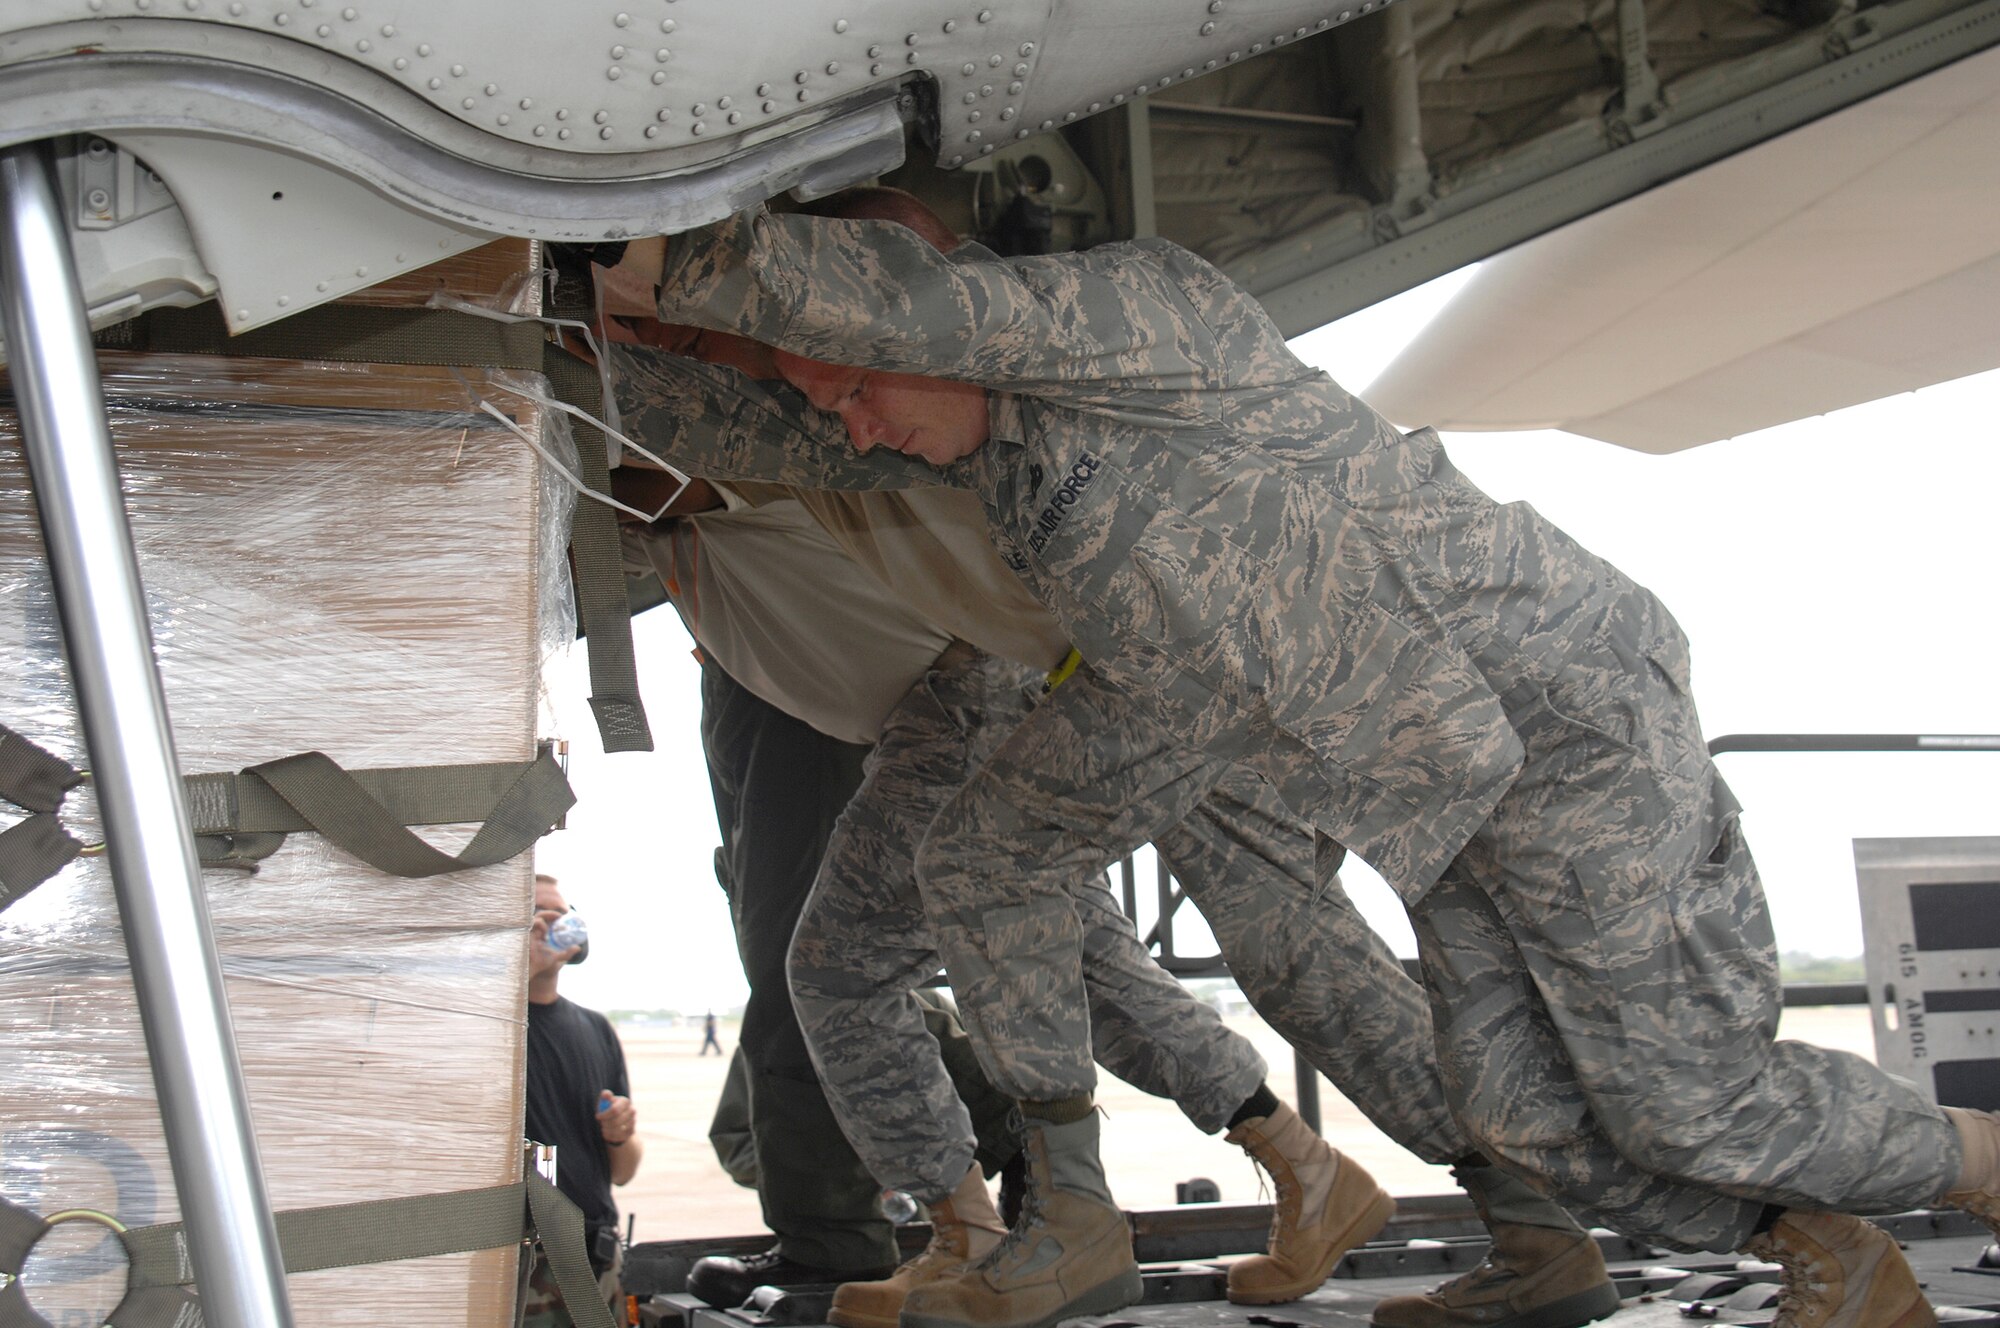 Airmen from Andersen AFB, Guam in support of humanitarian relief efforts, load a U.S. Marine Corps C-130 with 1,500 pounds of plastic tarp, 800 blankets and 12,250 pounds of water to Burma from Utapao International Airport. (U.S. Air Force photo by Senior Airman Sonya Croston)